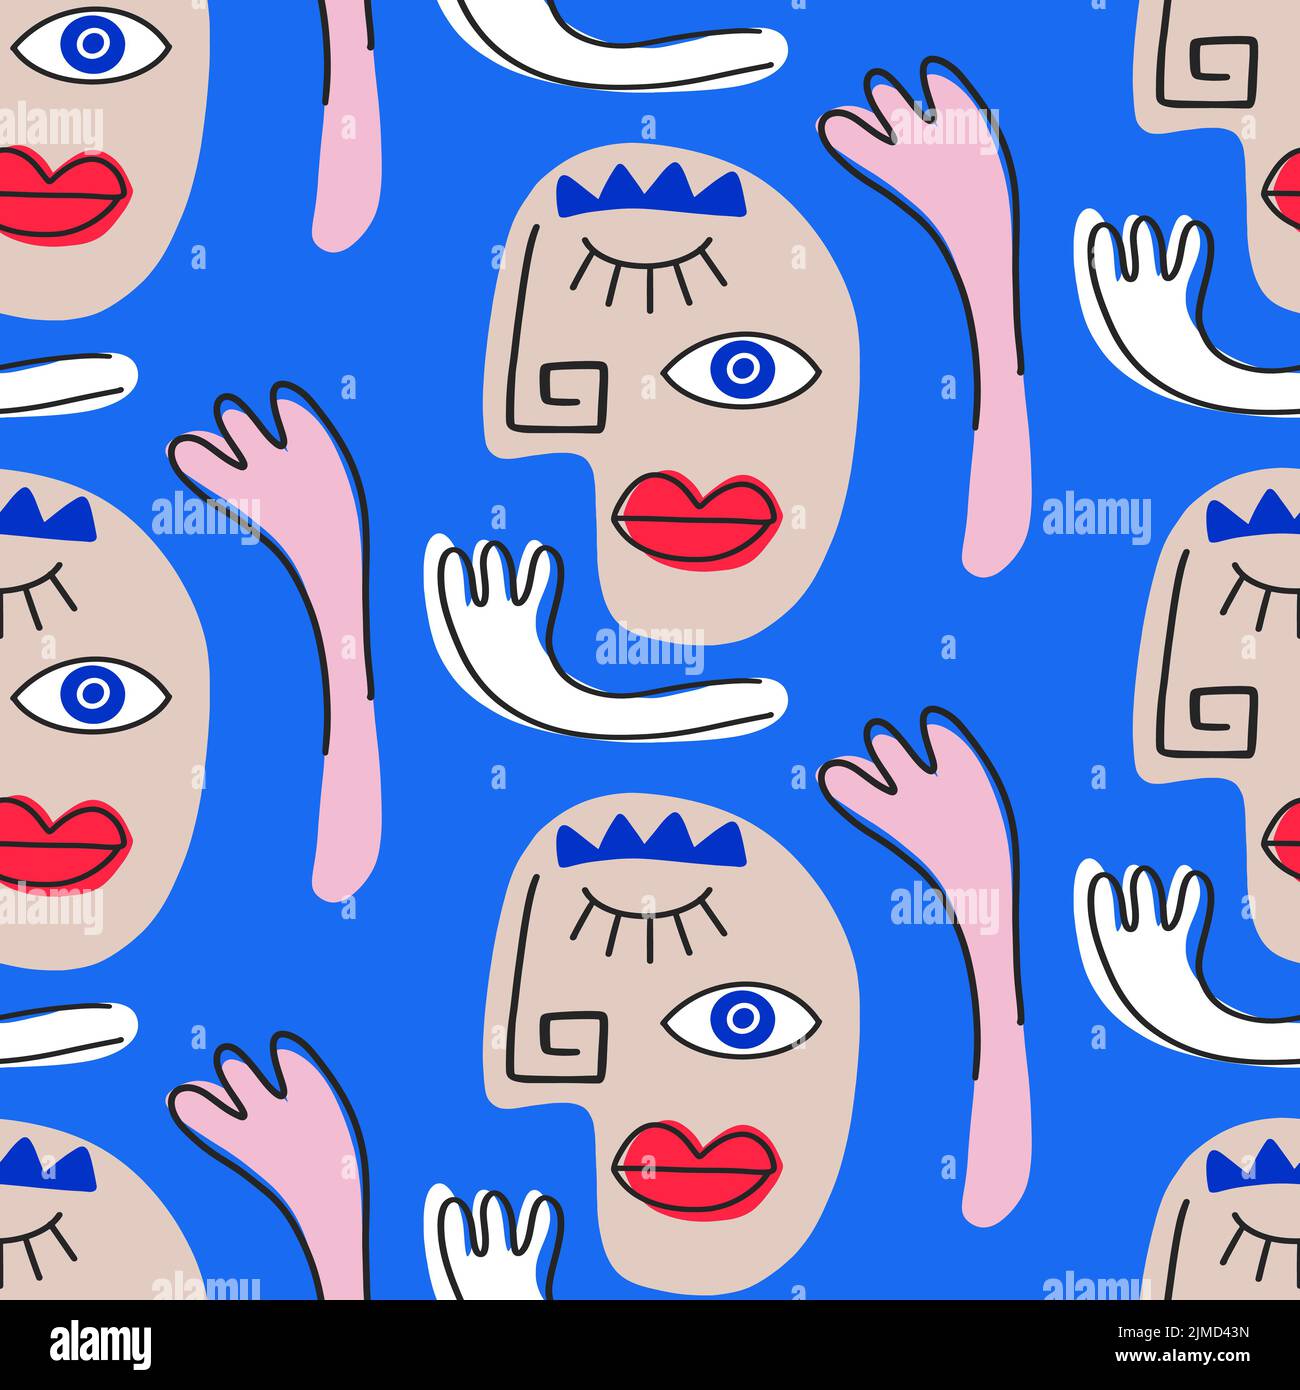 Abstract People Faces Seamless Pattern Stock Vector